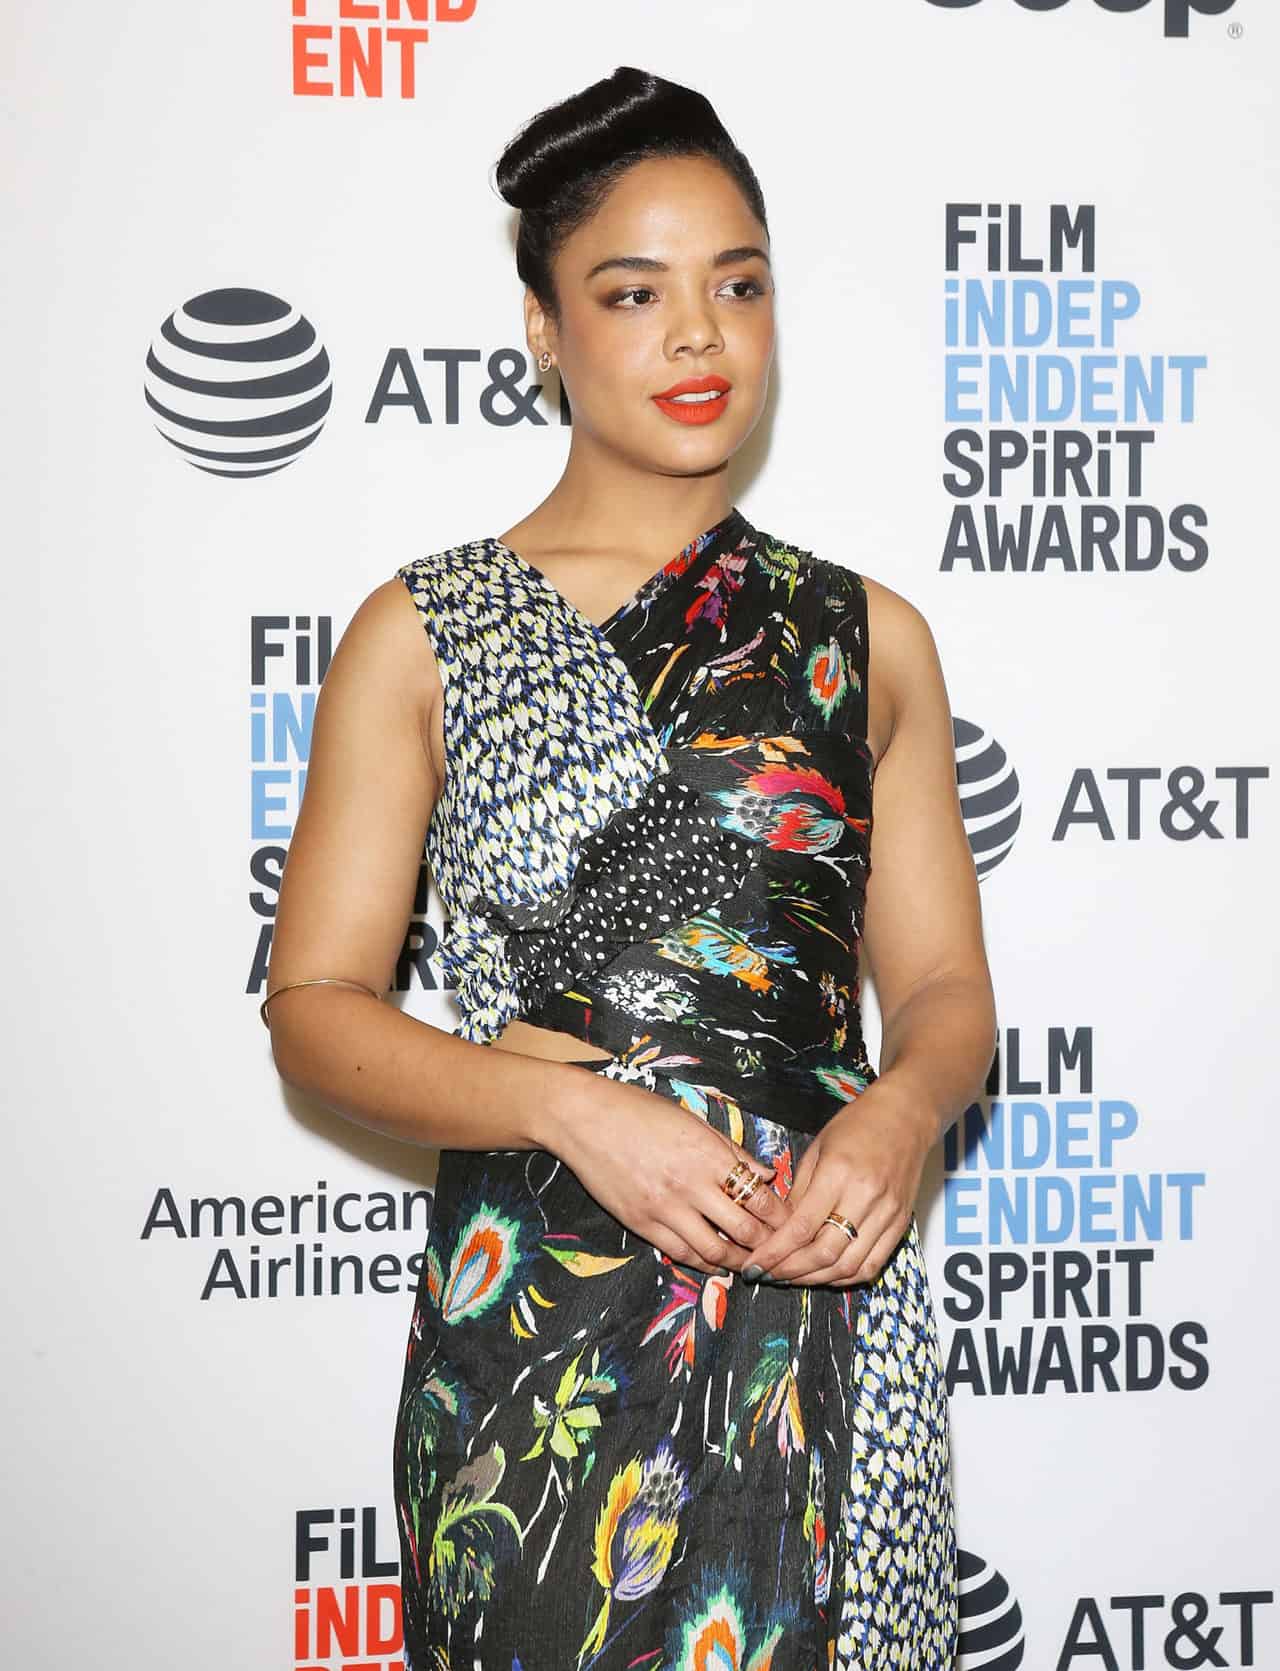 Nominees For The 33rd Annual Film Independent Spirit Awards Announced